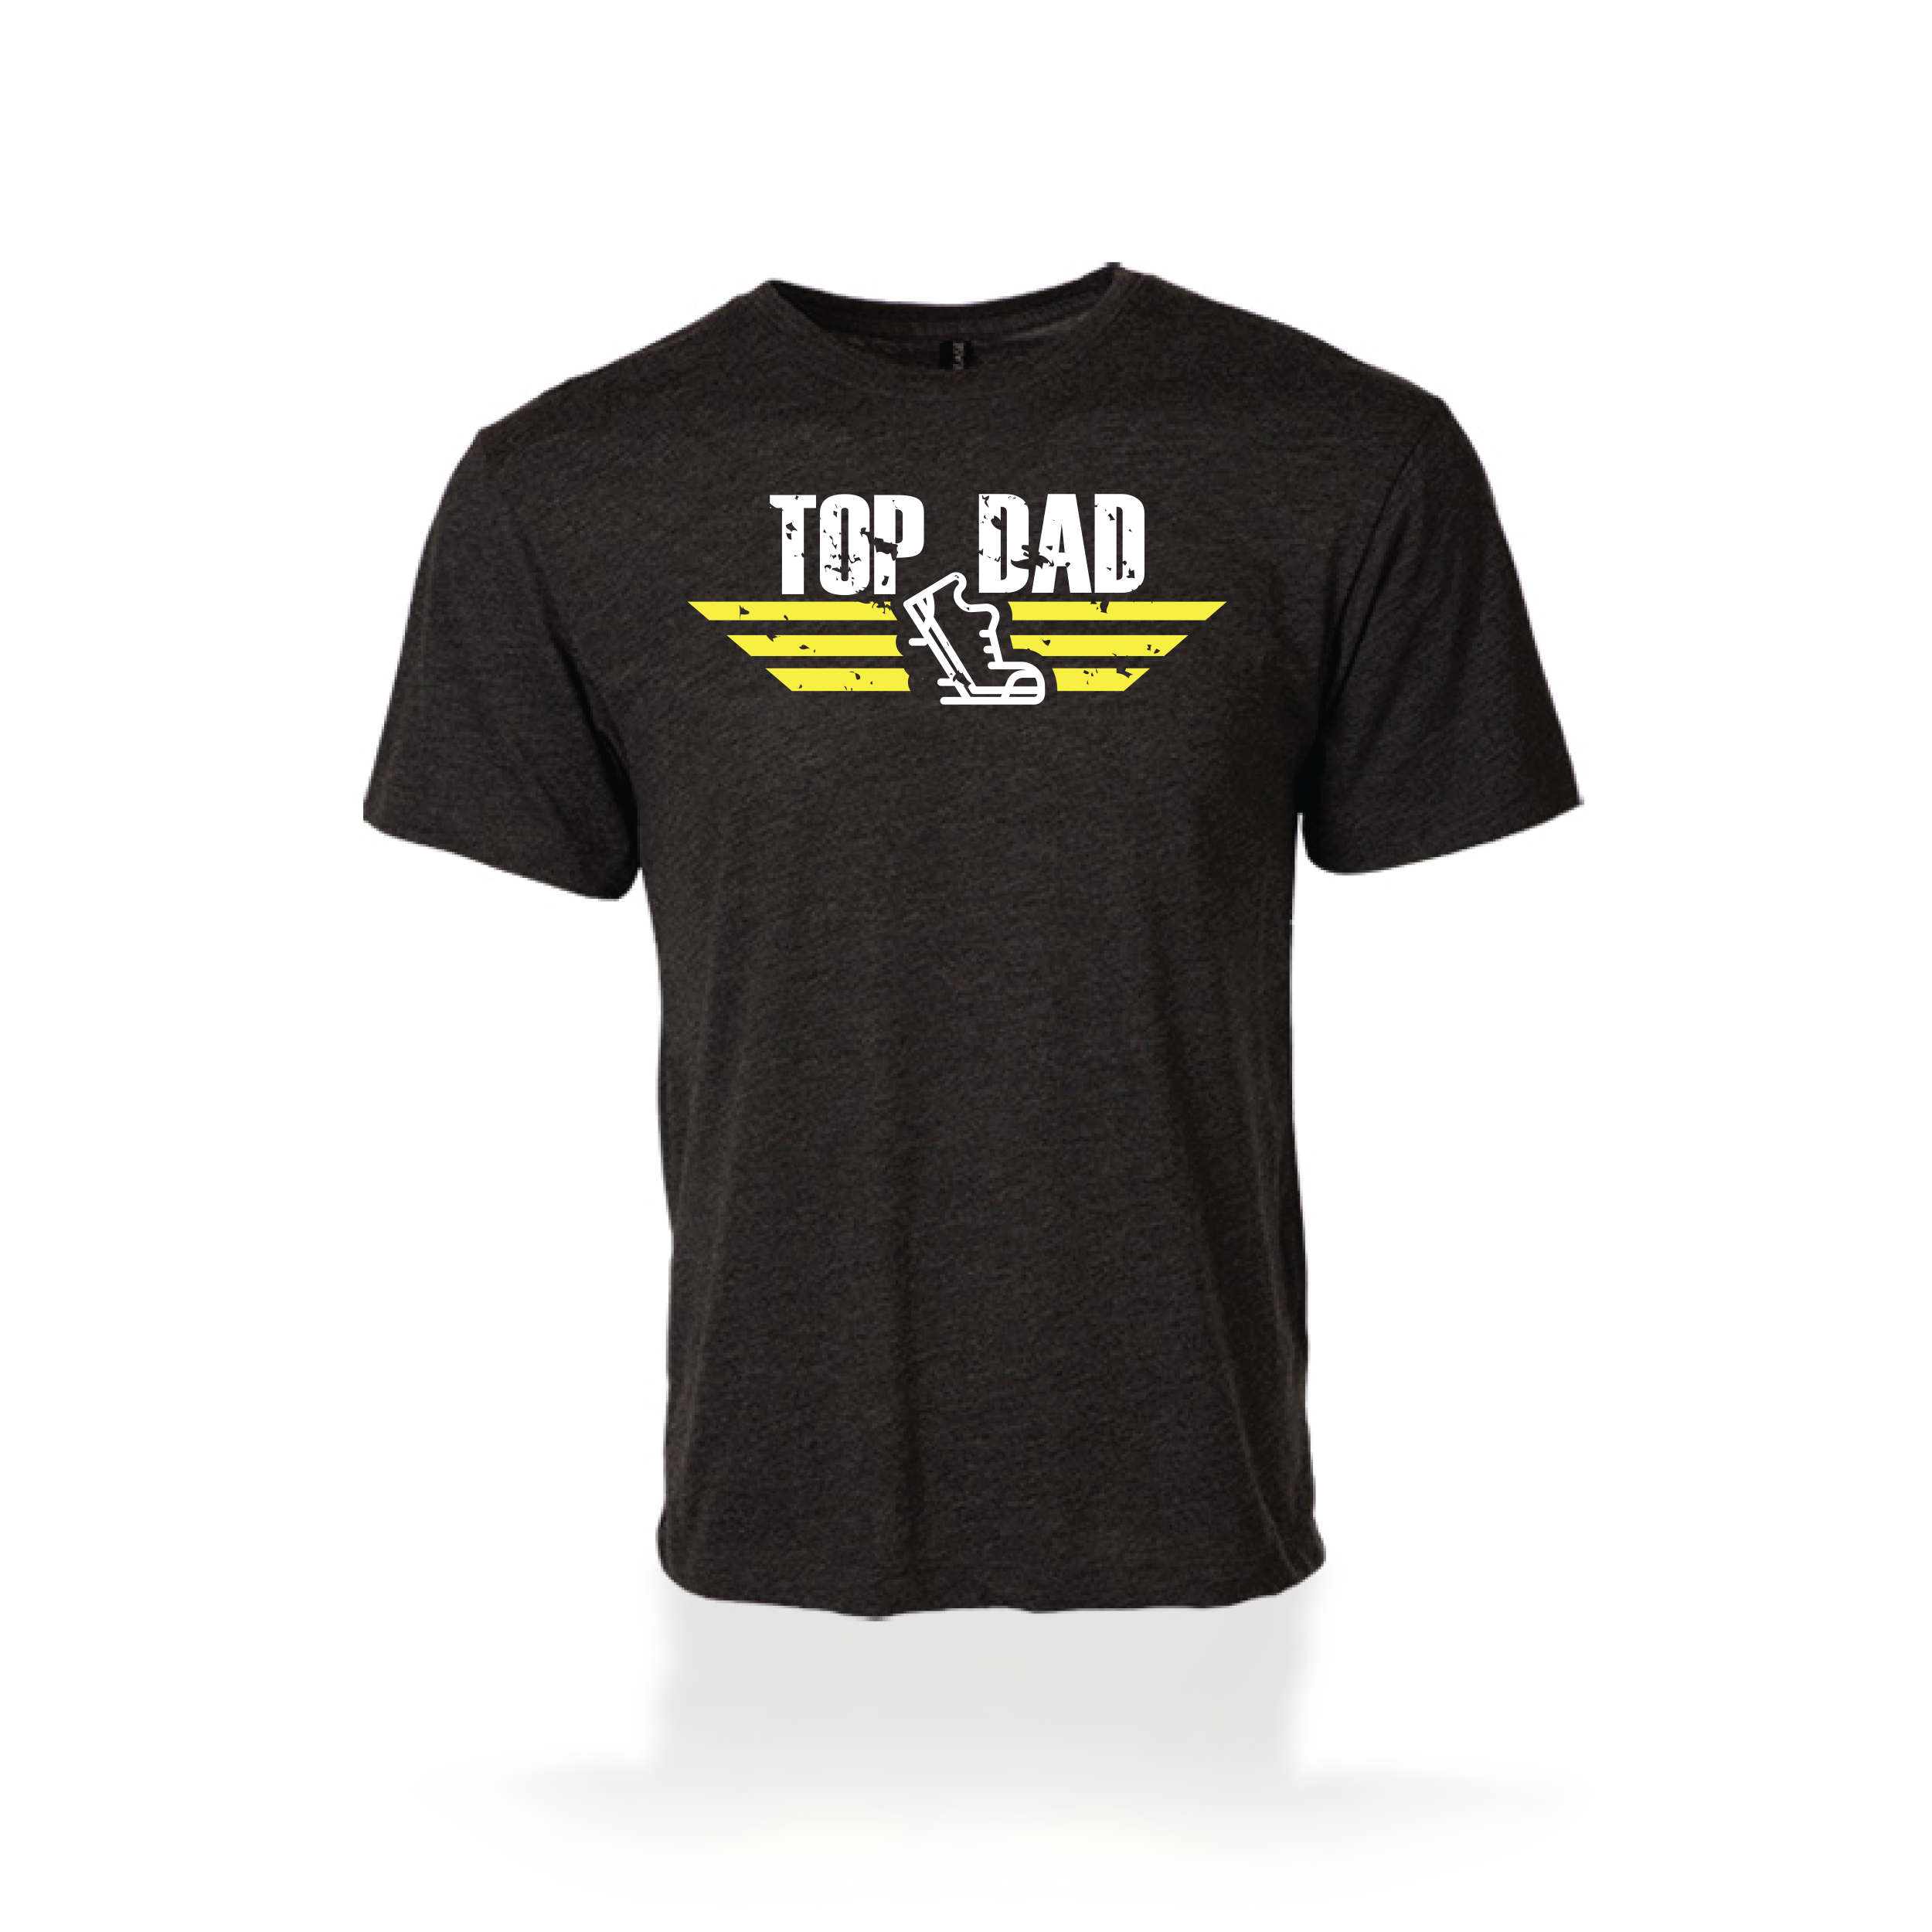 ProductCards_FathersDay_Apparel.png